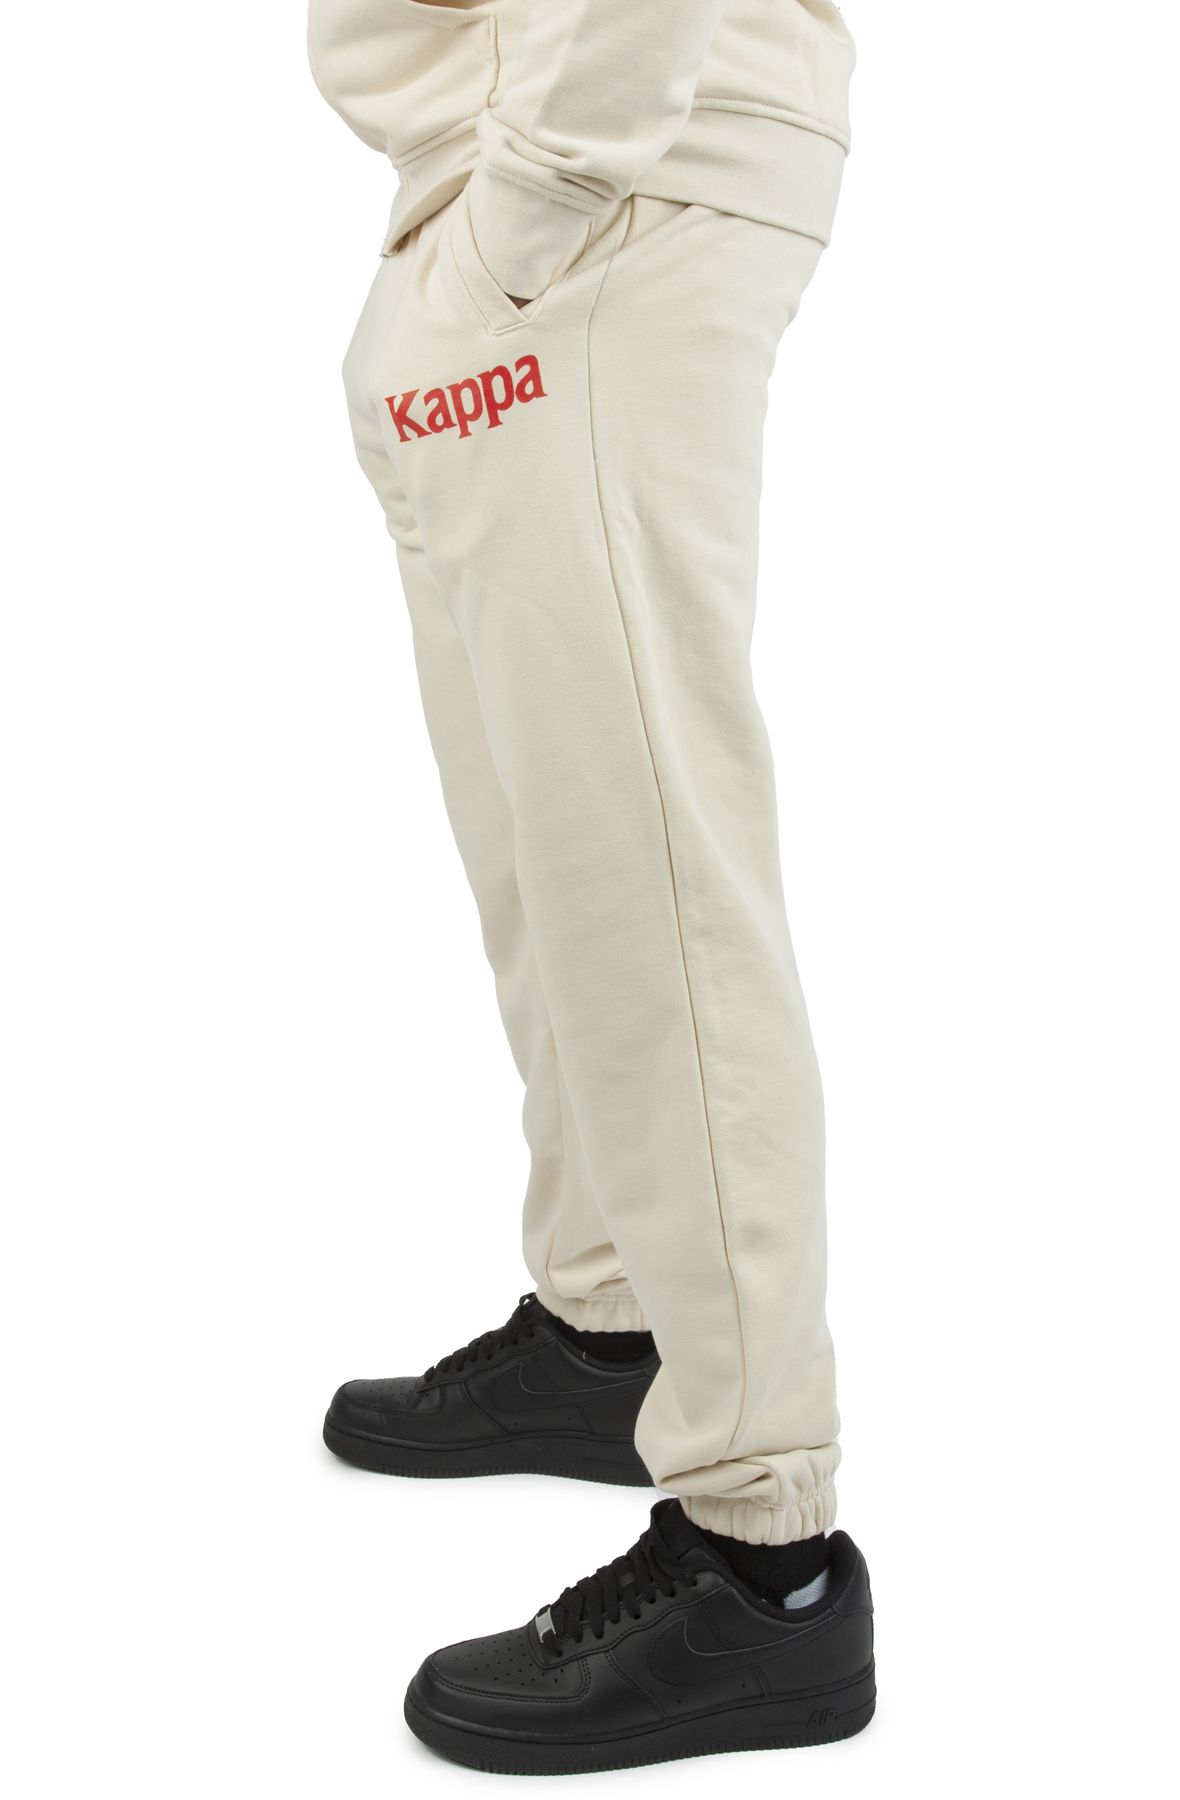 Kappa NWT Authentic Trybunalski Knit Legging Sz M/L Beige-Lt Pink Lt Red  Cherry - $55 New With Tags - From Elizabeth